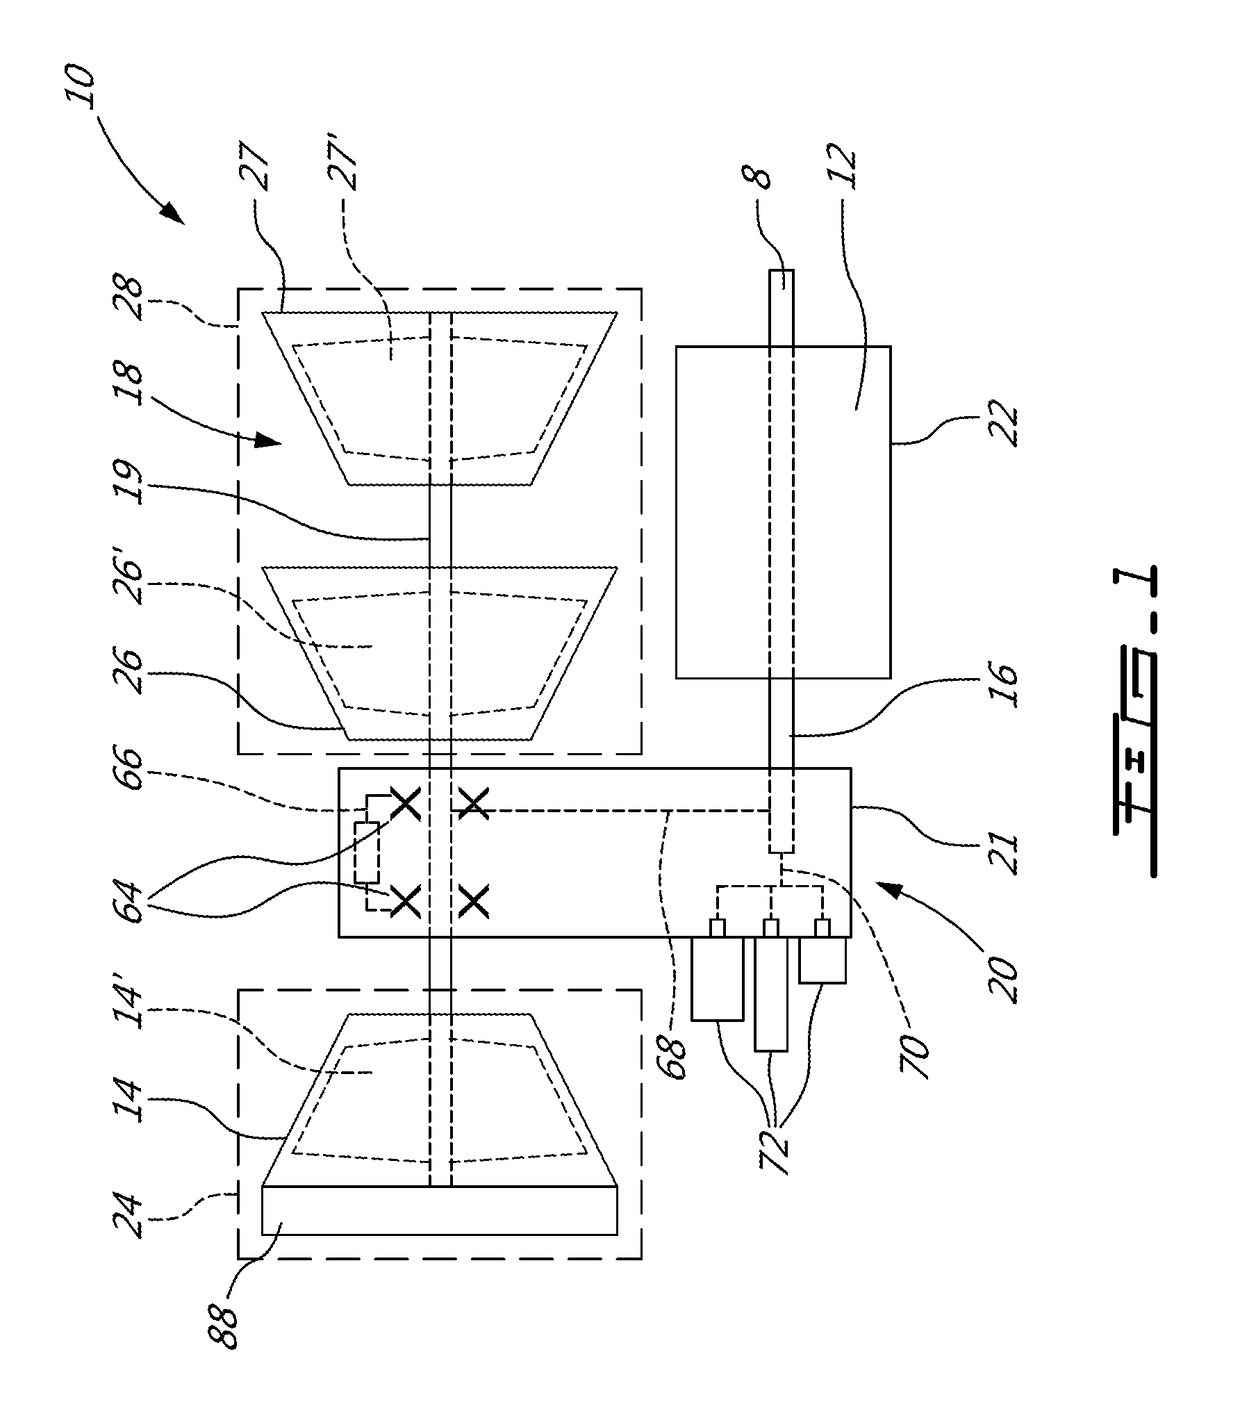 Compound engine assembly with cantilevered compressor and turbine